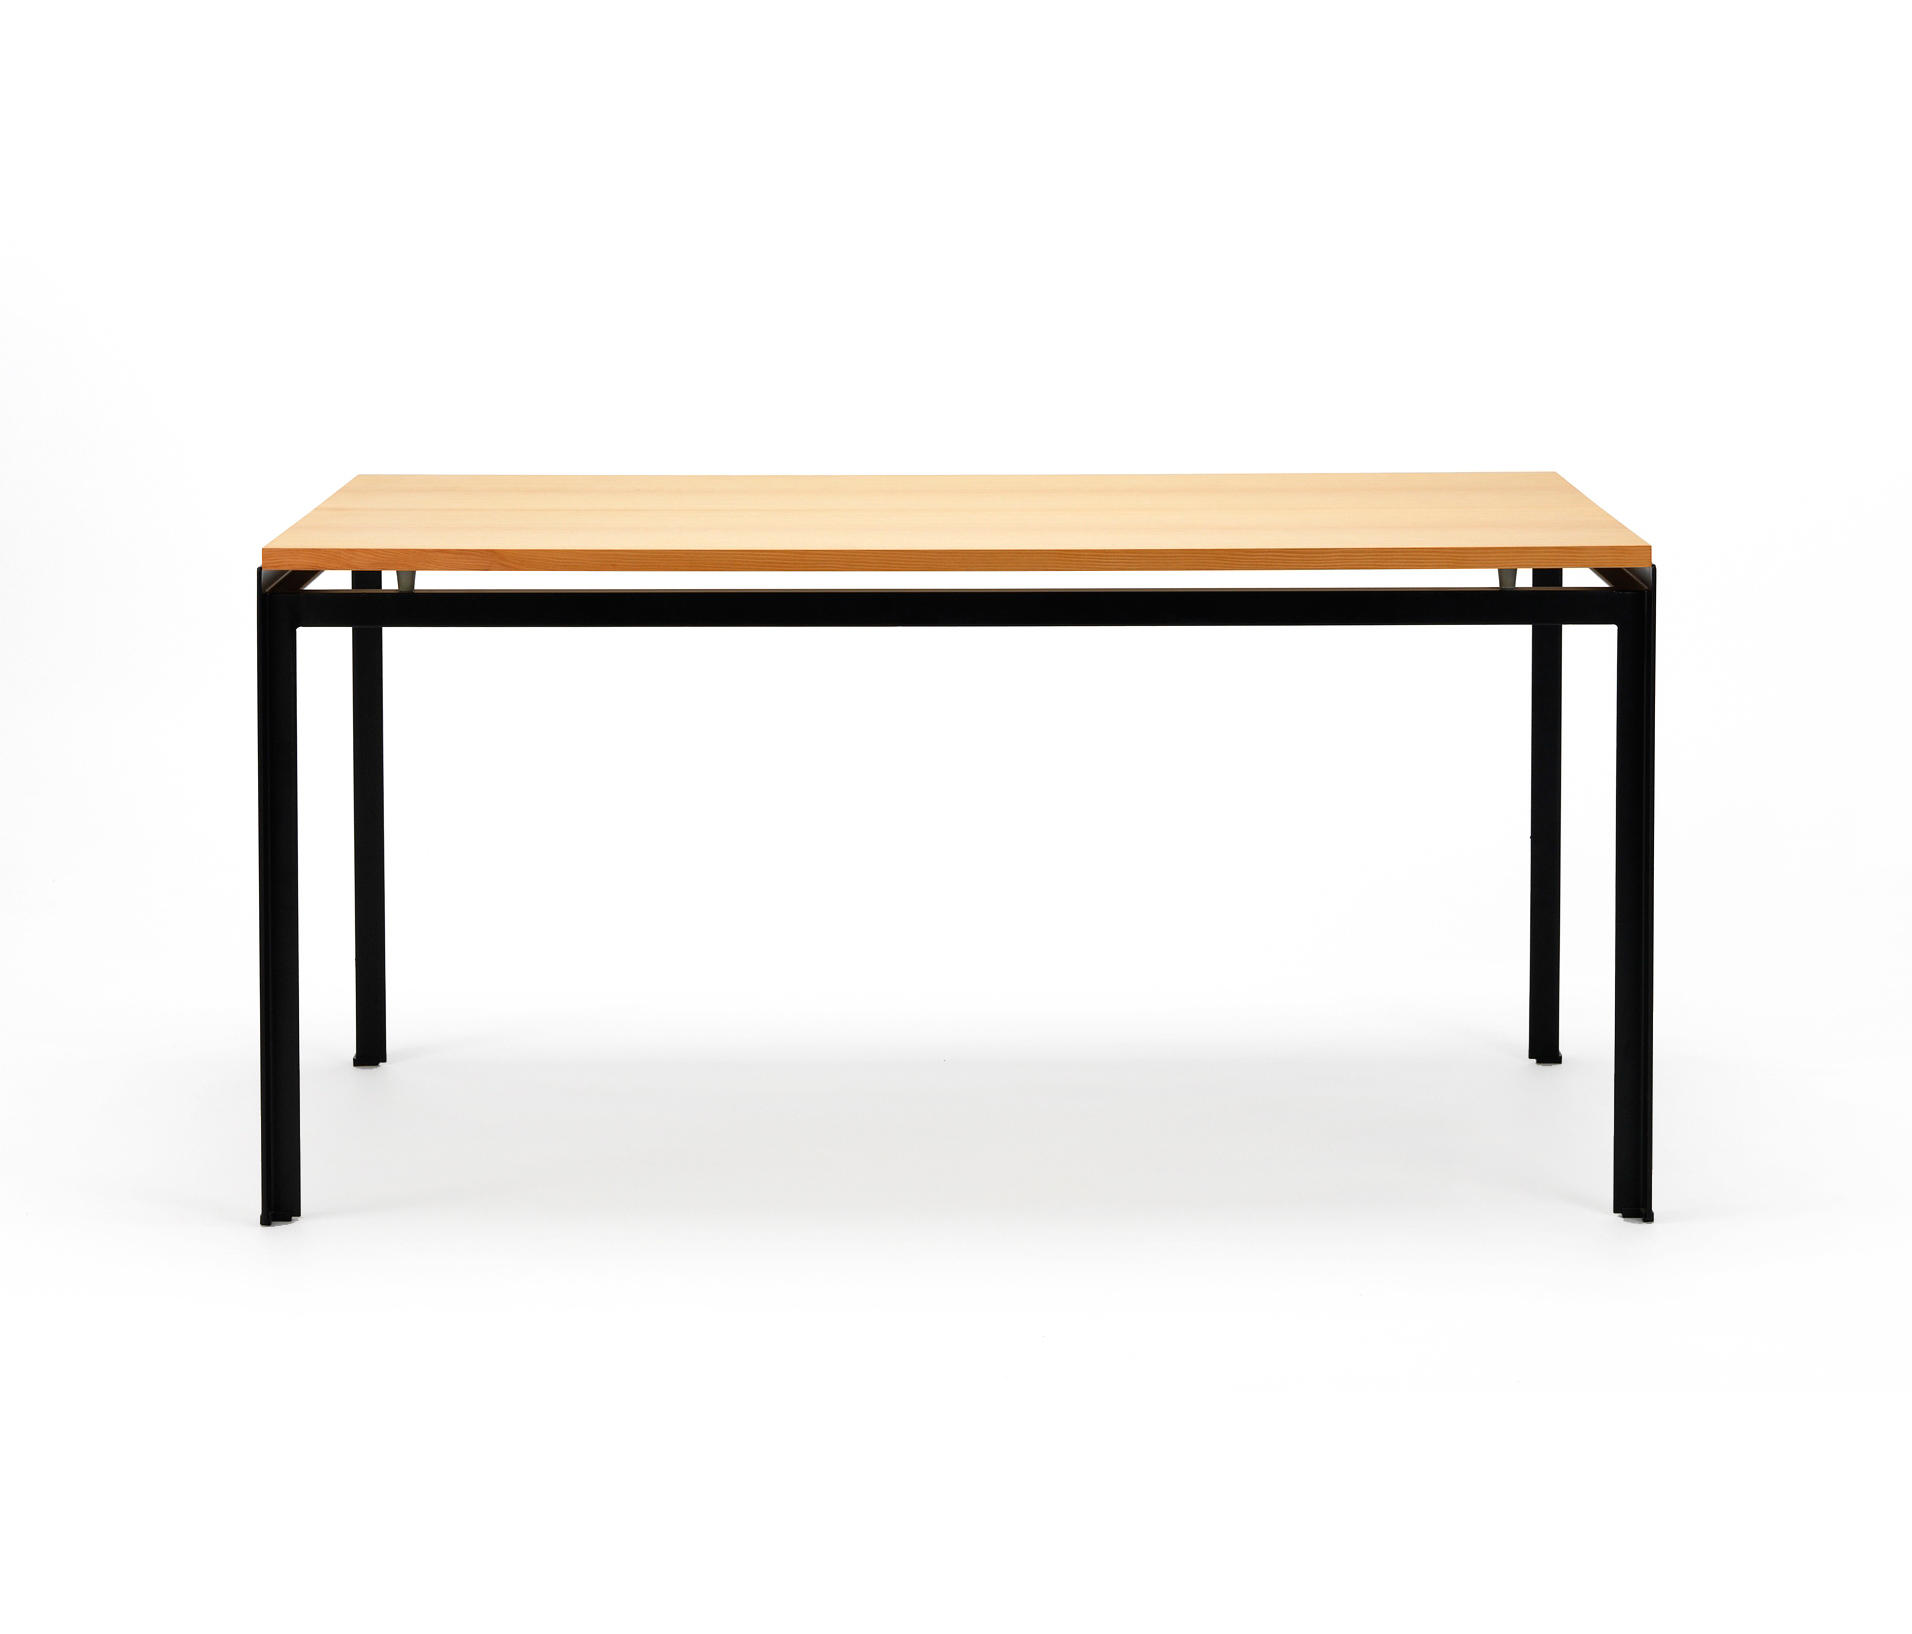 Writing Desk Contract Tables From Carl Hansen Son Architonic